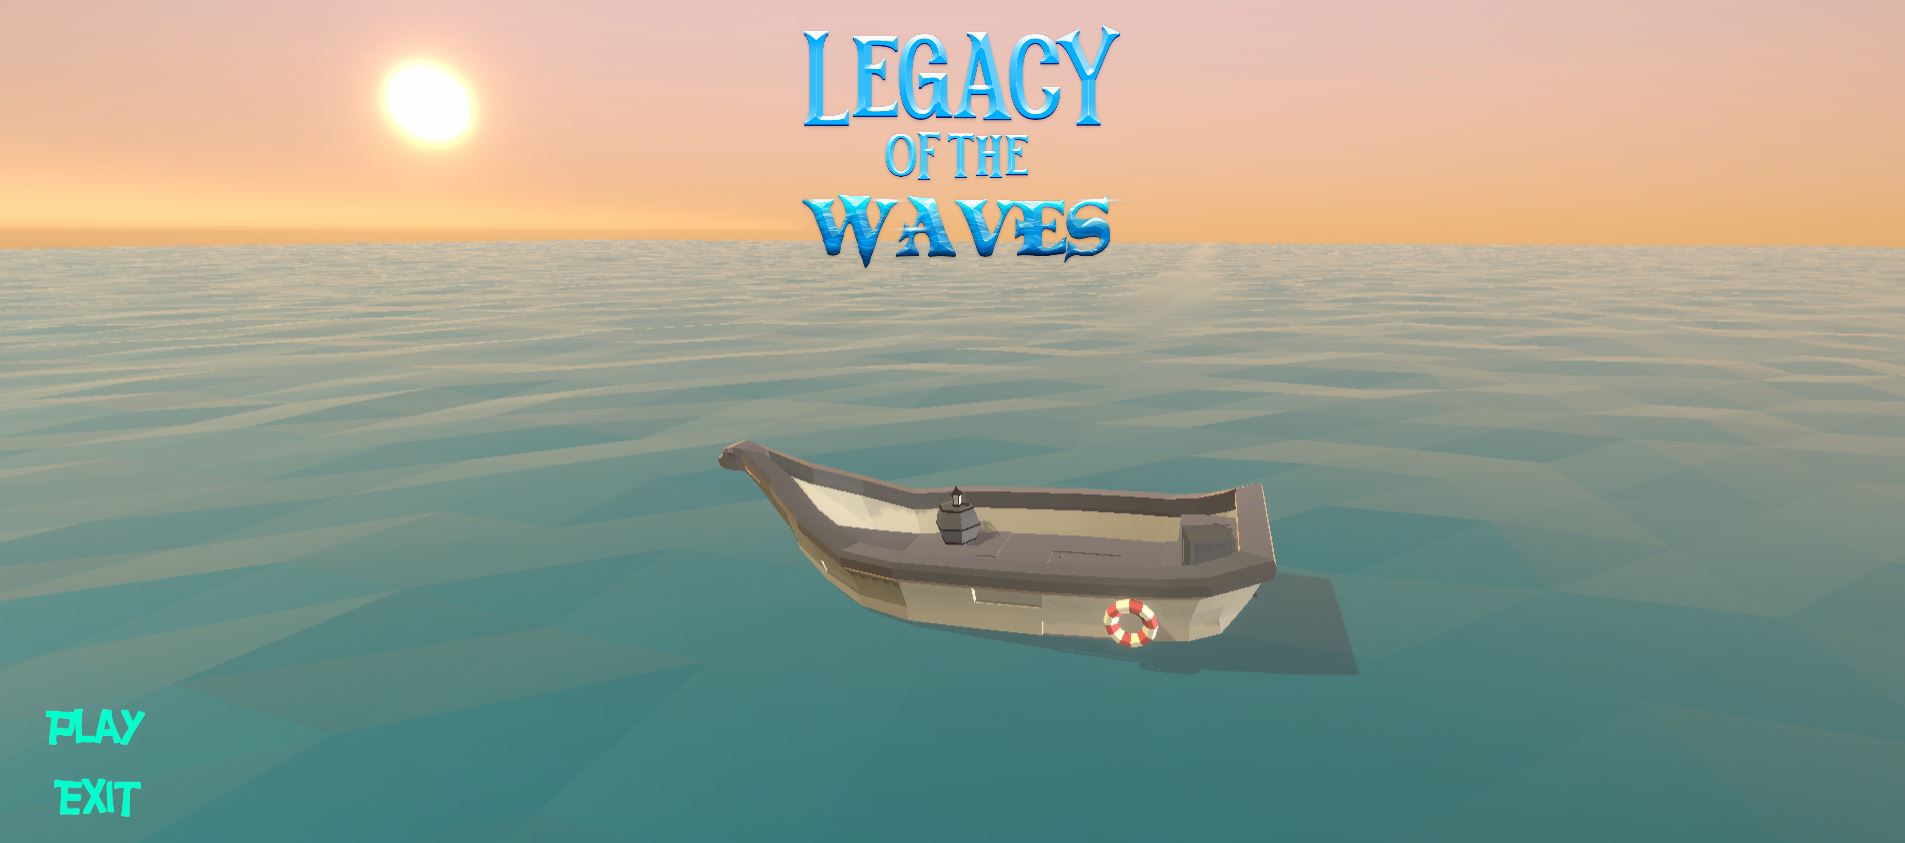 Legacy of the Waves